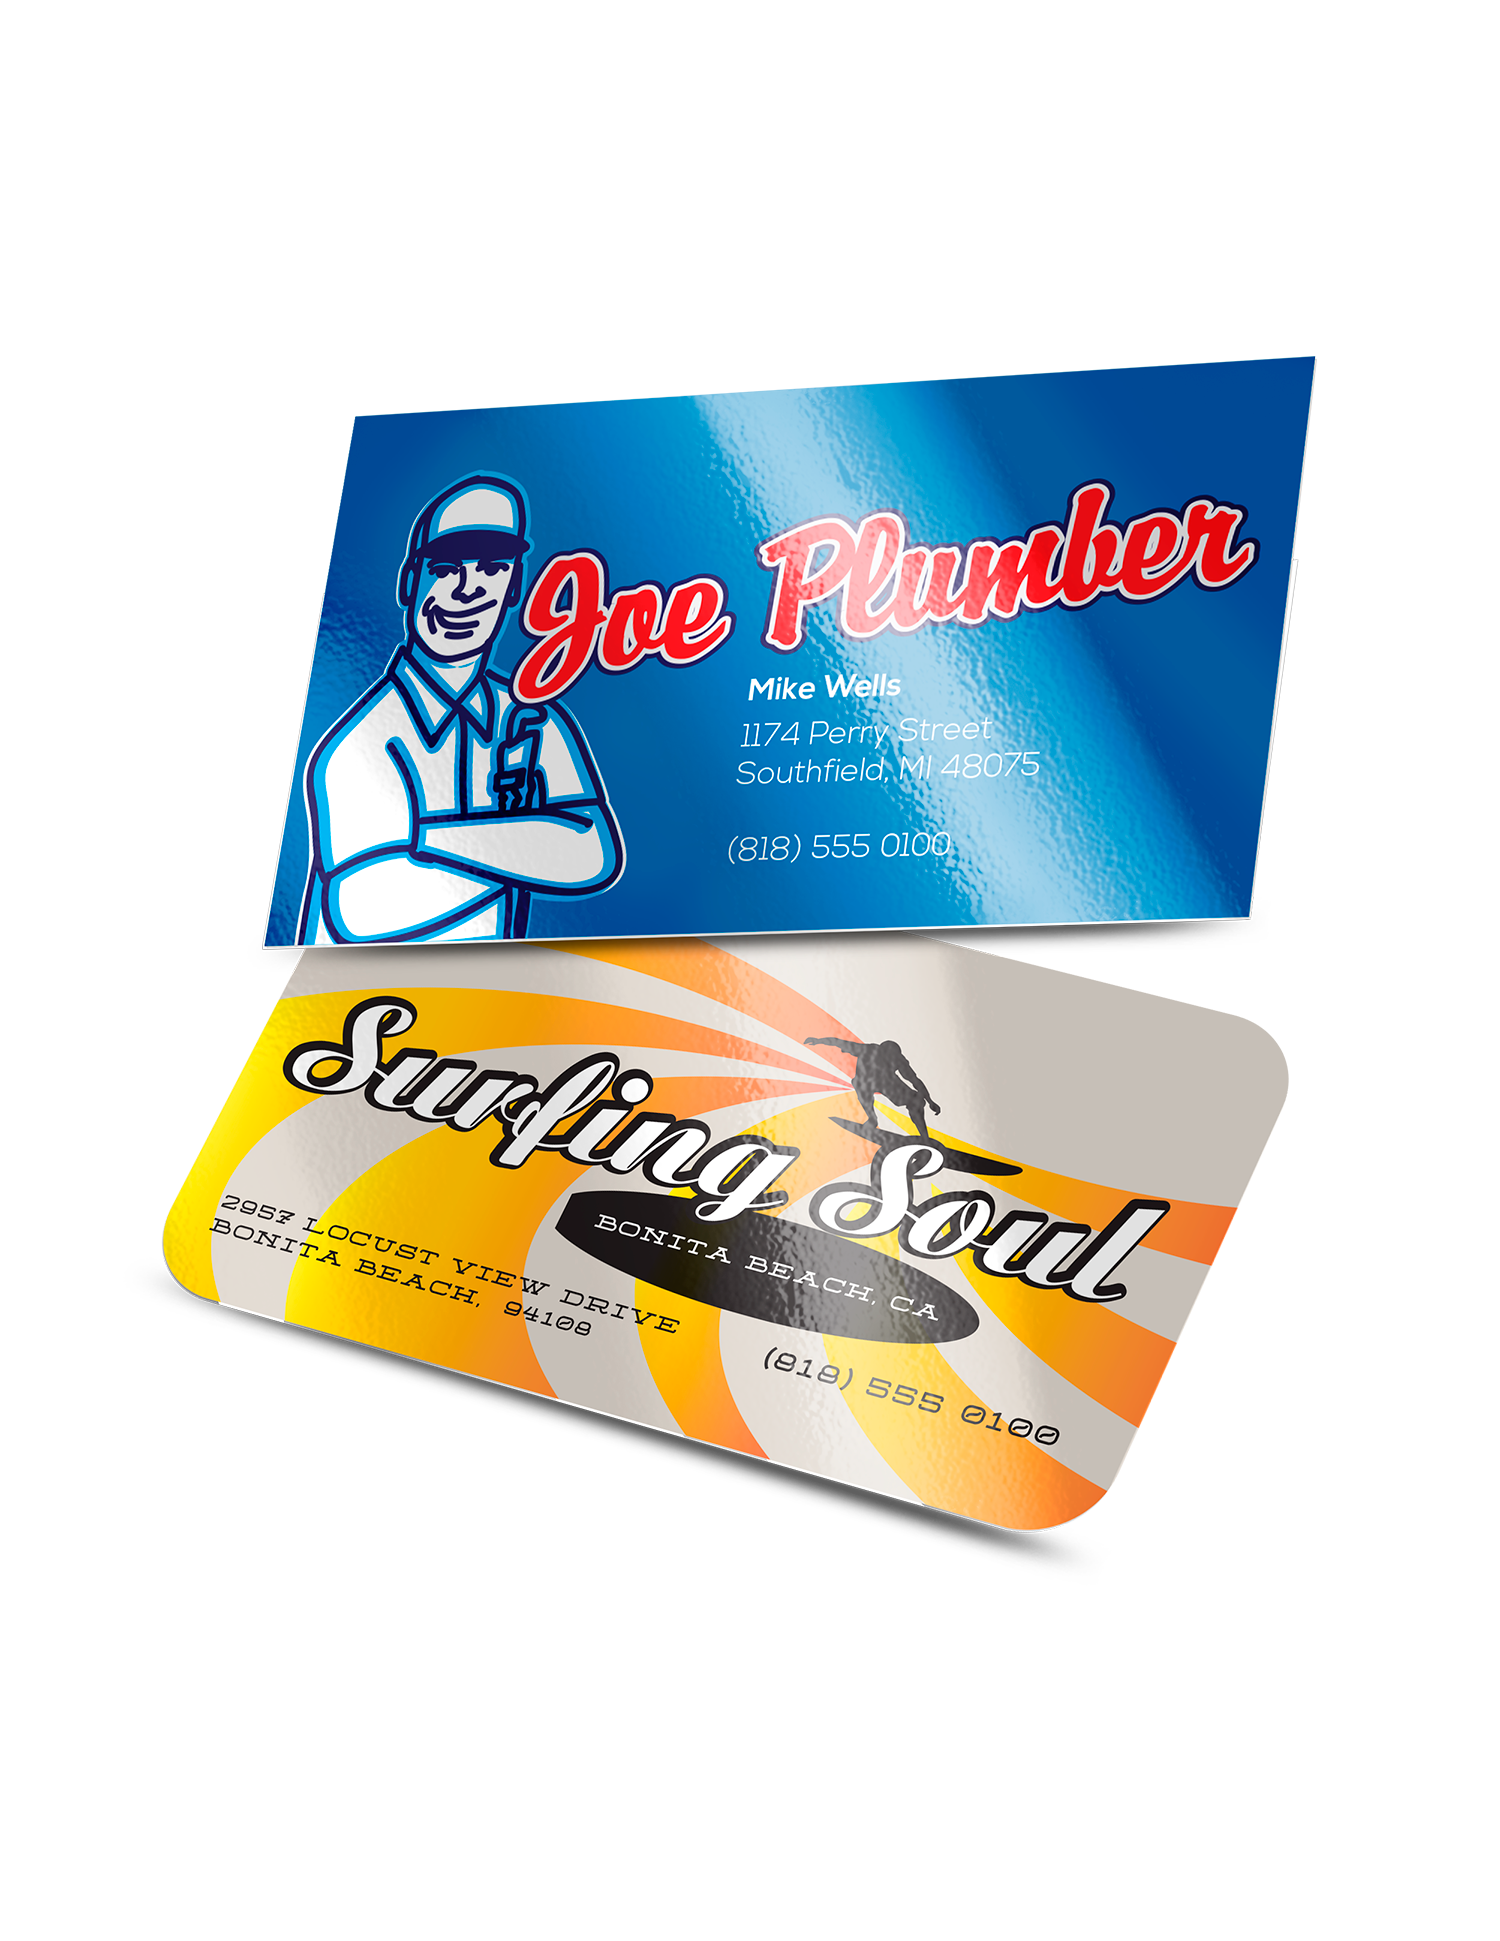 Luster Business Card Printing - Full Color Printing Services - Roseville Printing California